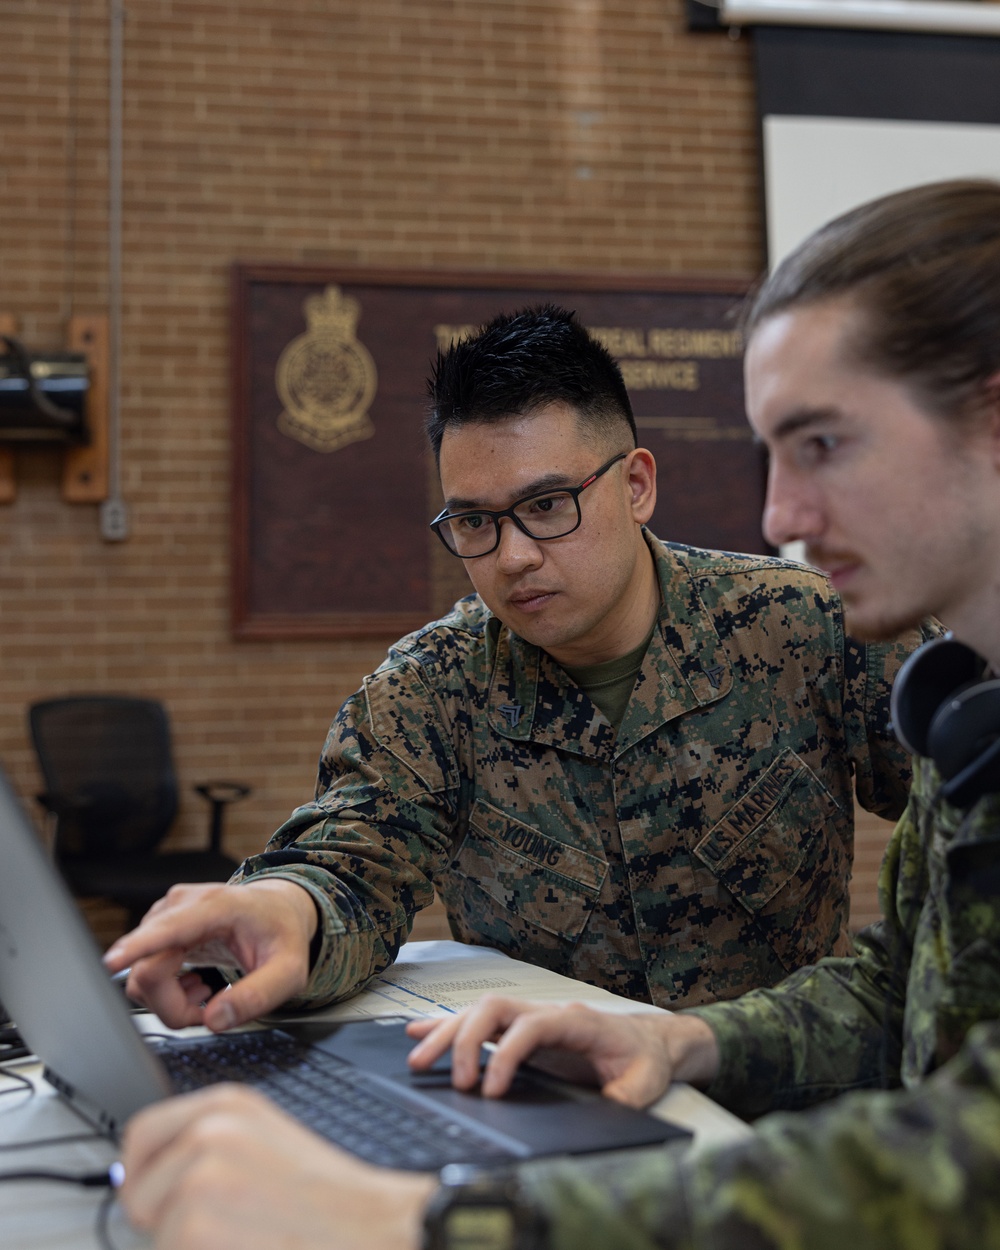 U.S. Marines and Canadian Soldiers plan to defend against cyber attacks